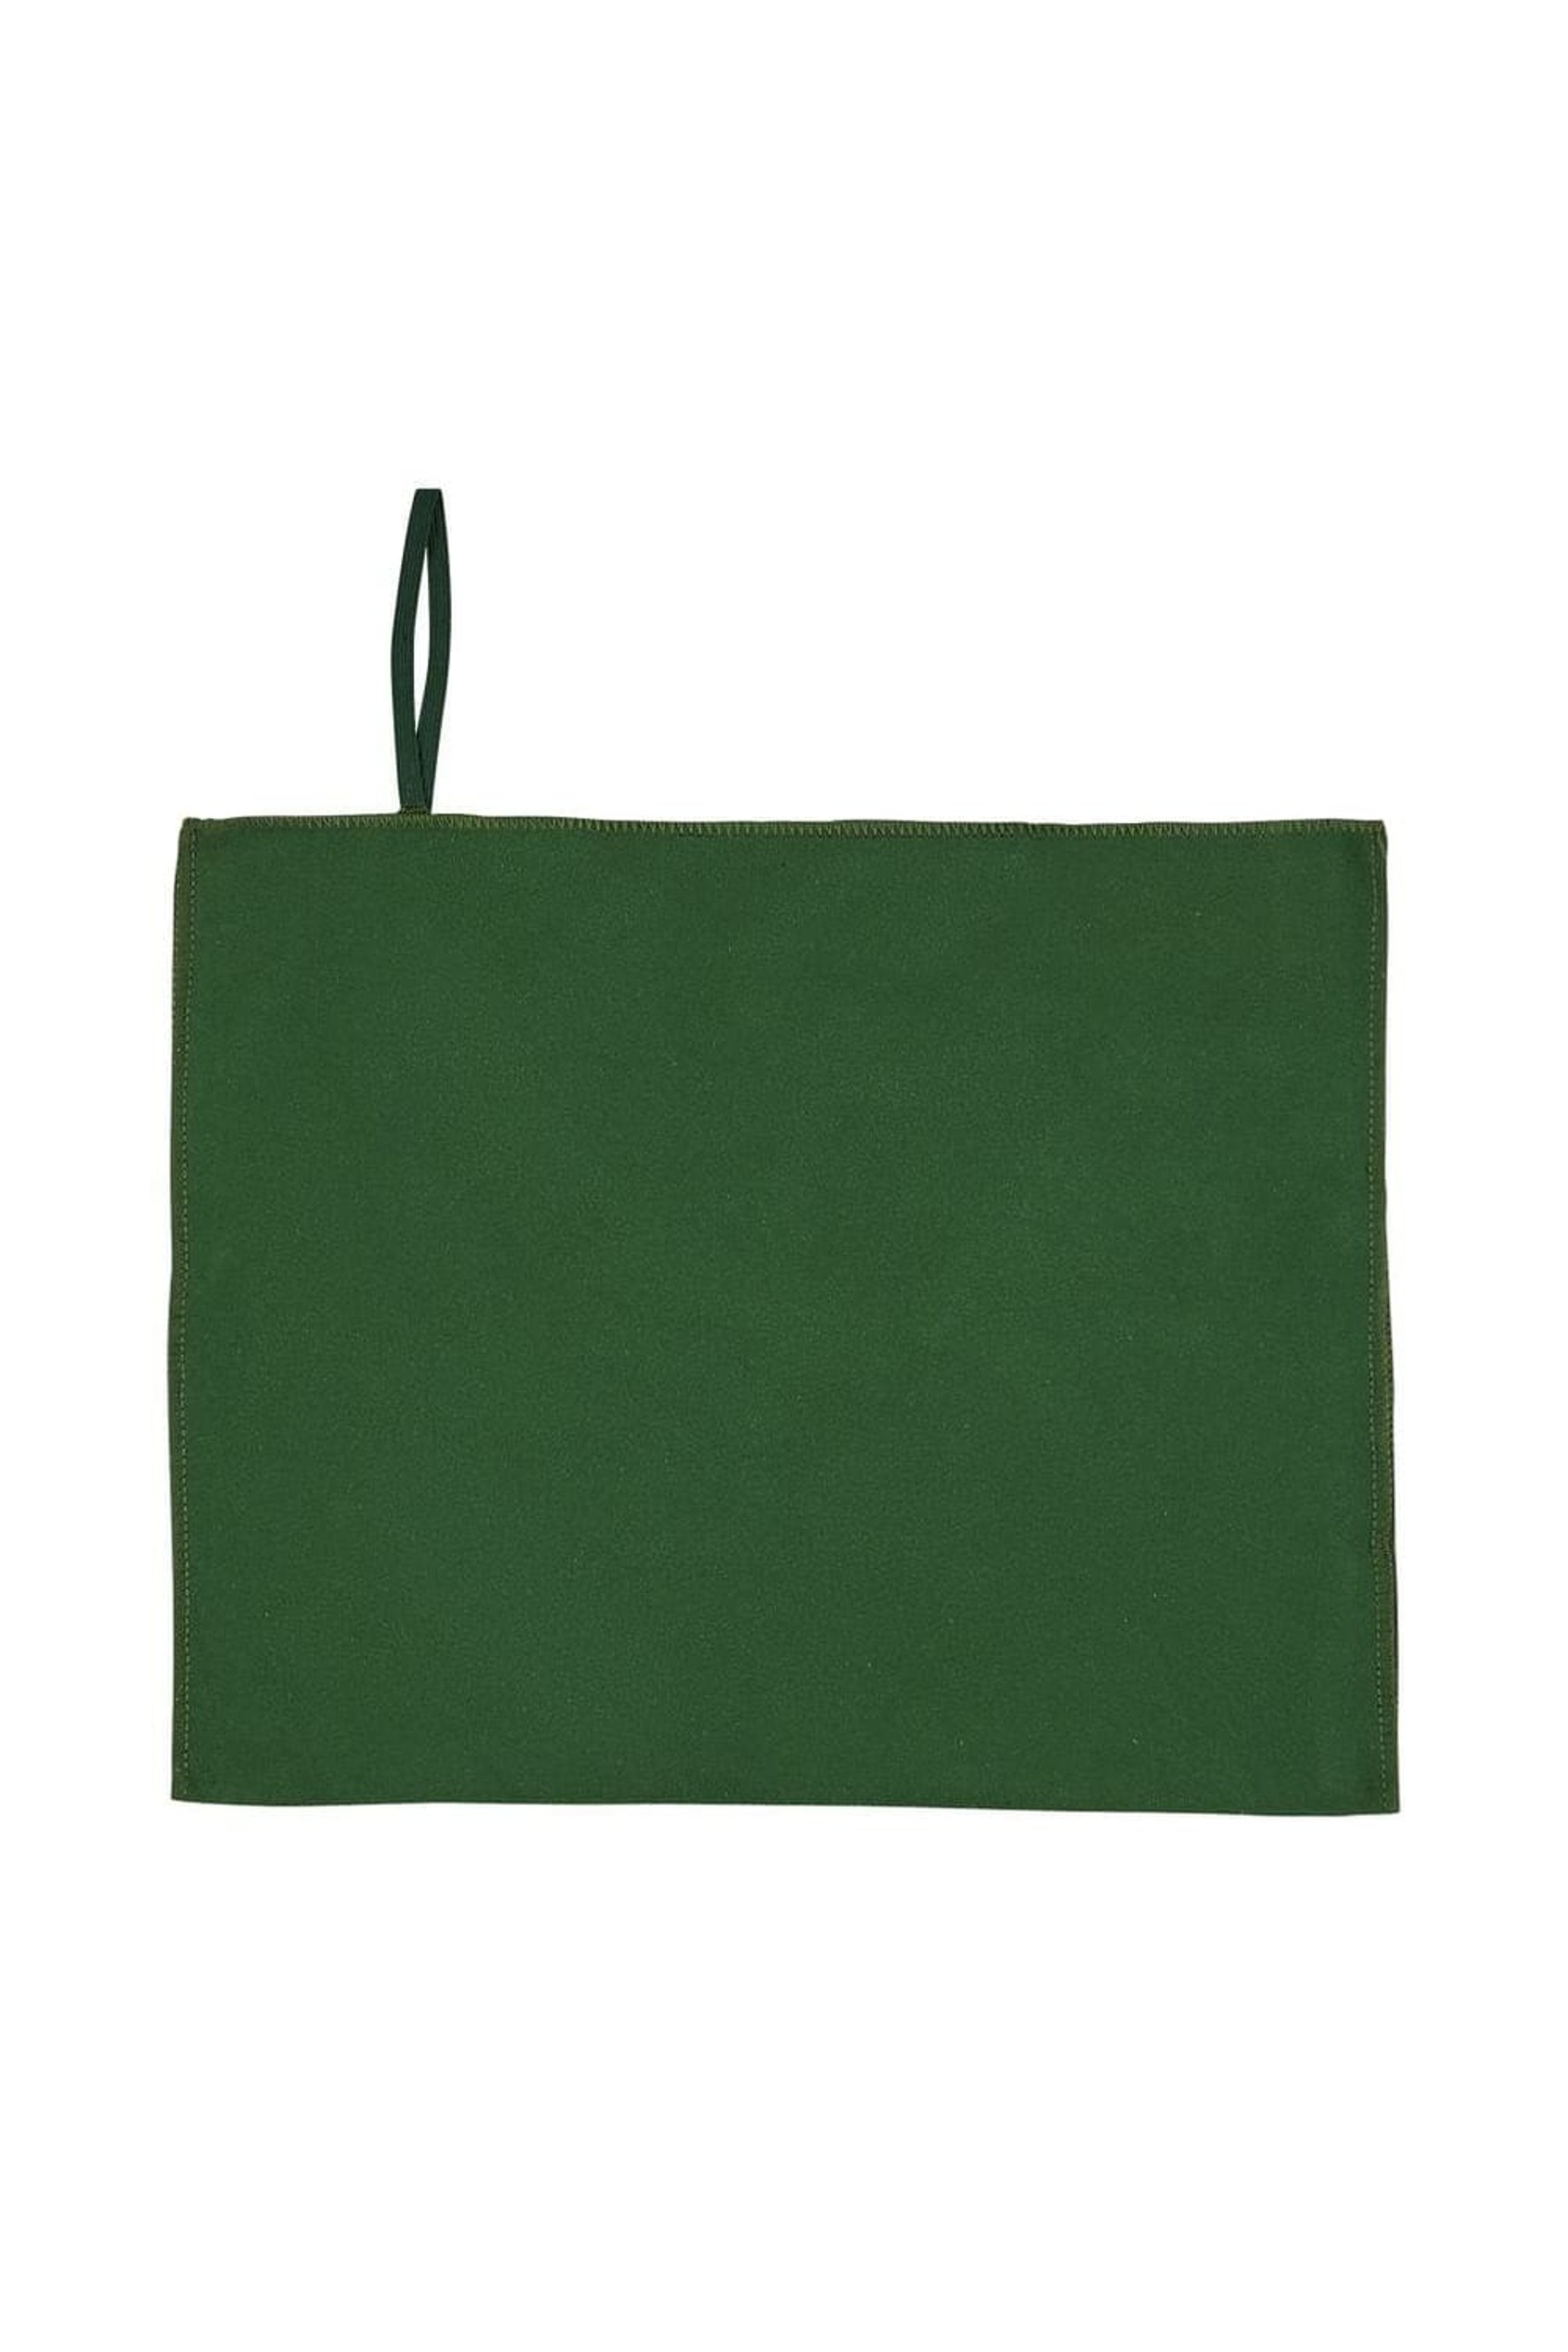 SOLS SOLS SOL´S ATOLL 30 MICROFIBER GUEST TOWEL (BOTTLE GREEN) (ONE SIZE)